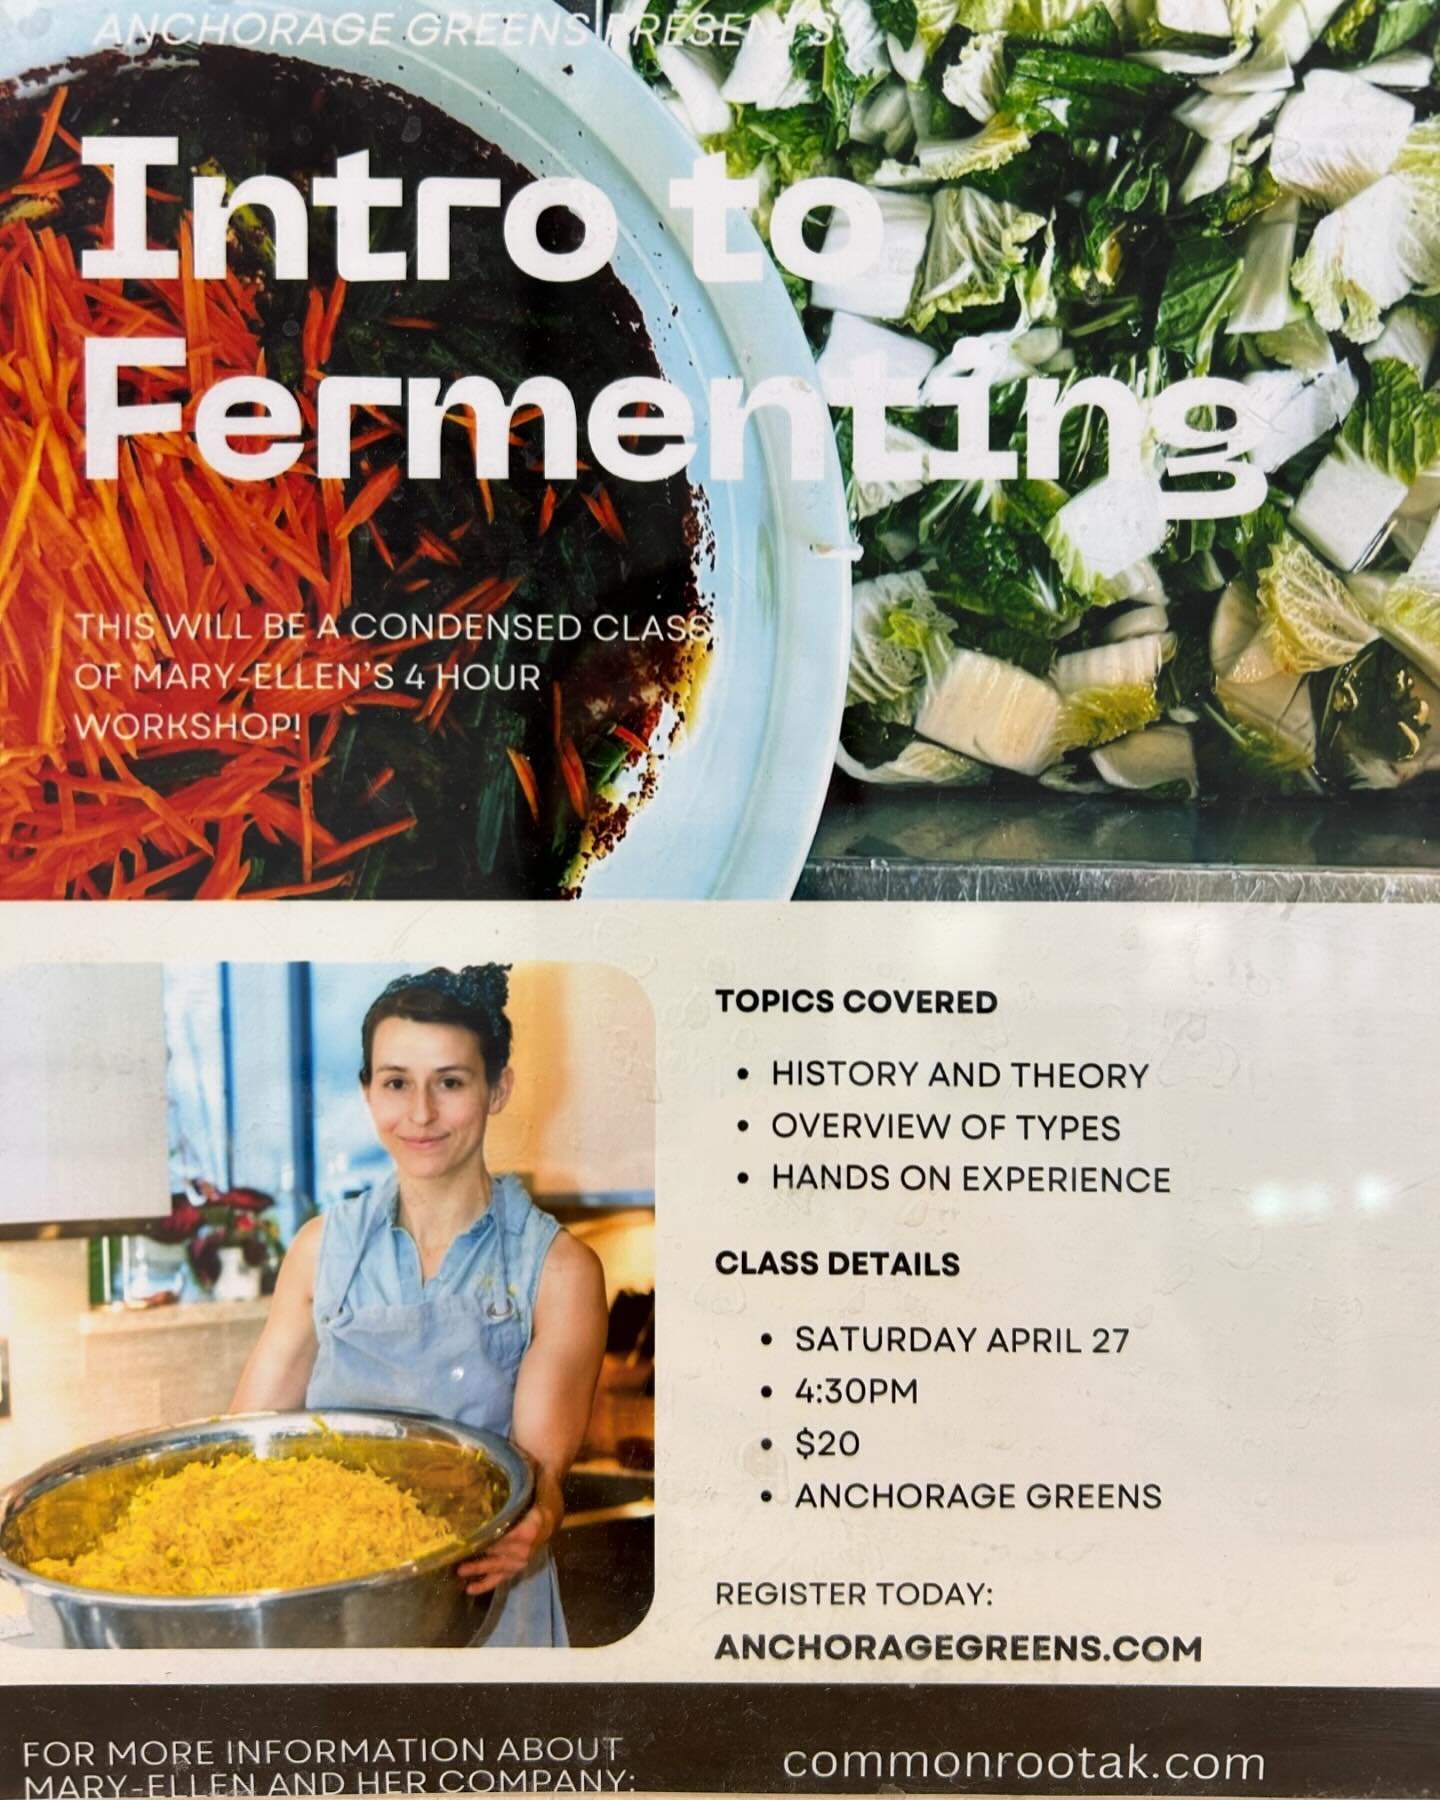 This coming Saturday 4/27 Mary-Ellen with Common Root will be giving a talk about fermented foods at Anchorage Greens from 4.30-5.30
Go to Anchorage Greens website to sign up for your spot to attend and learn about the process of fermenting.